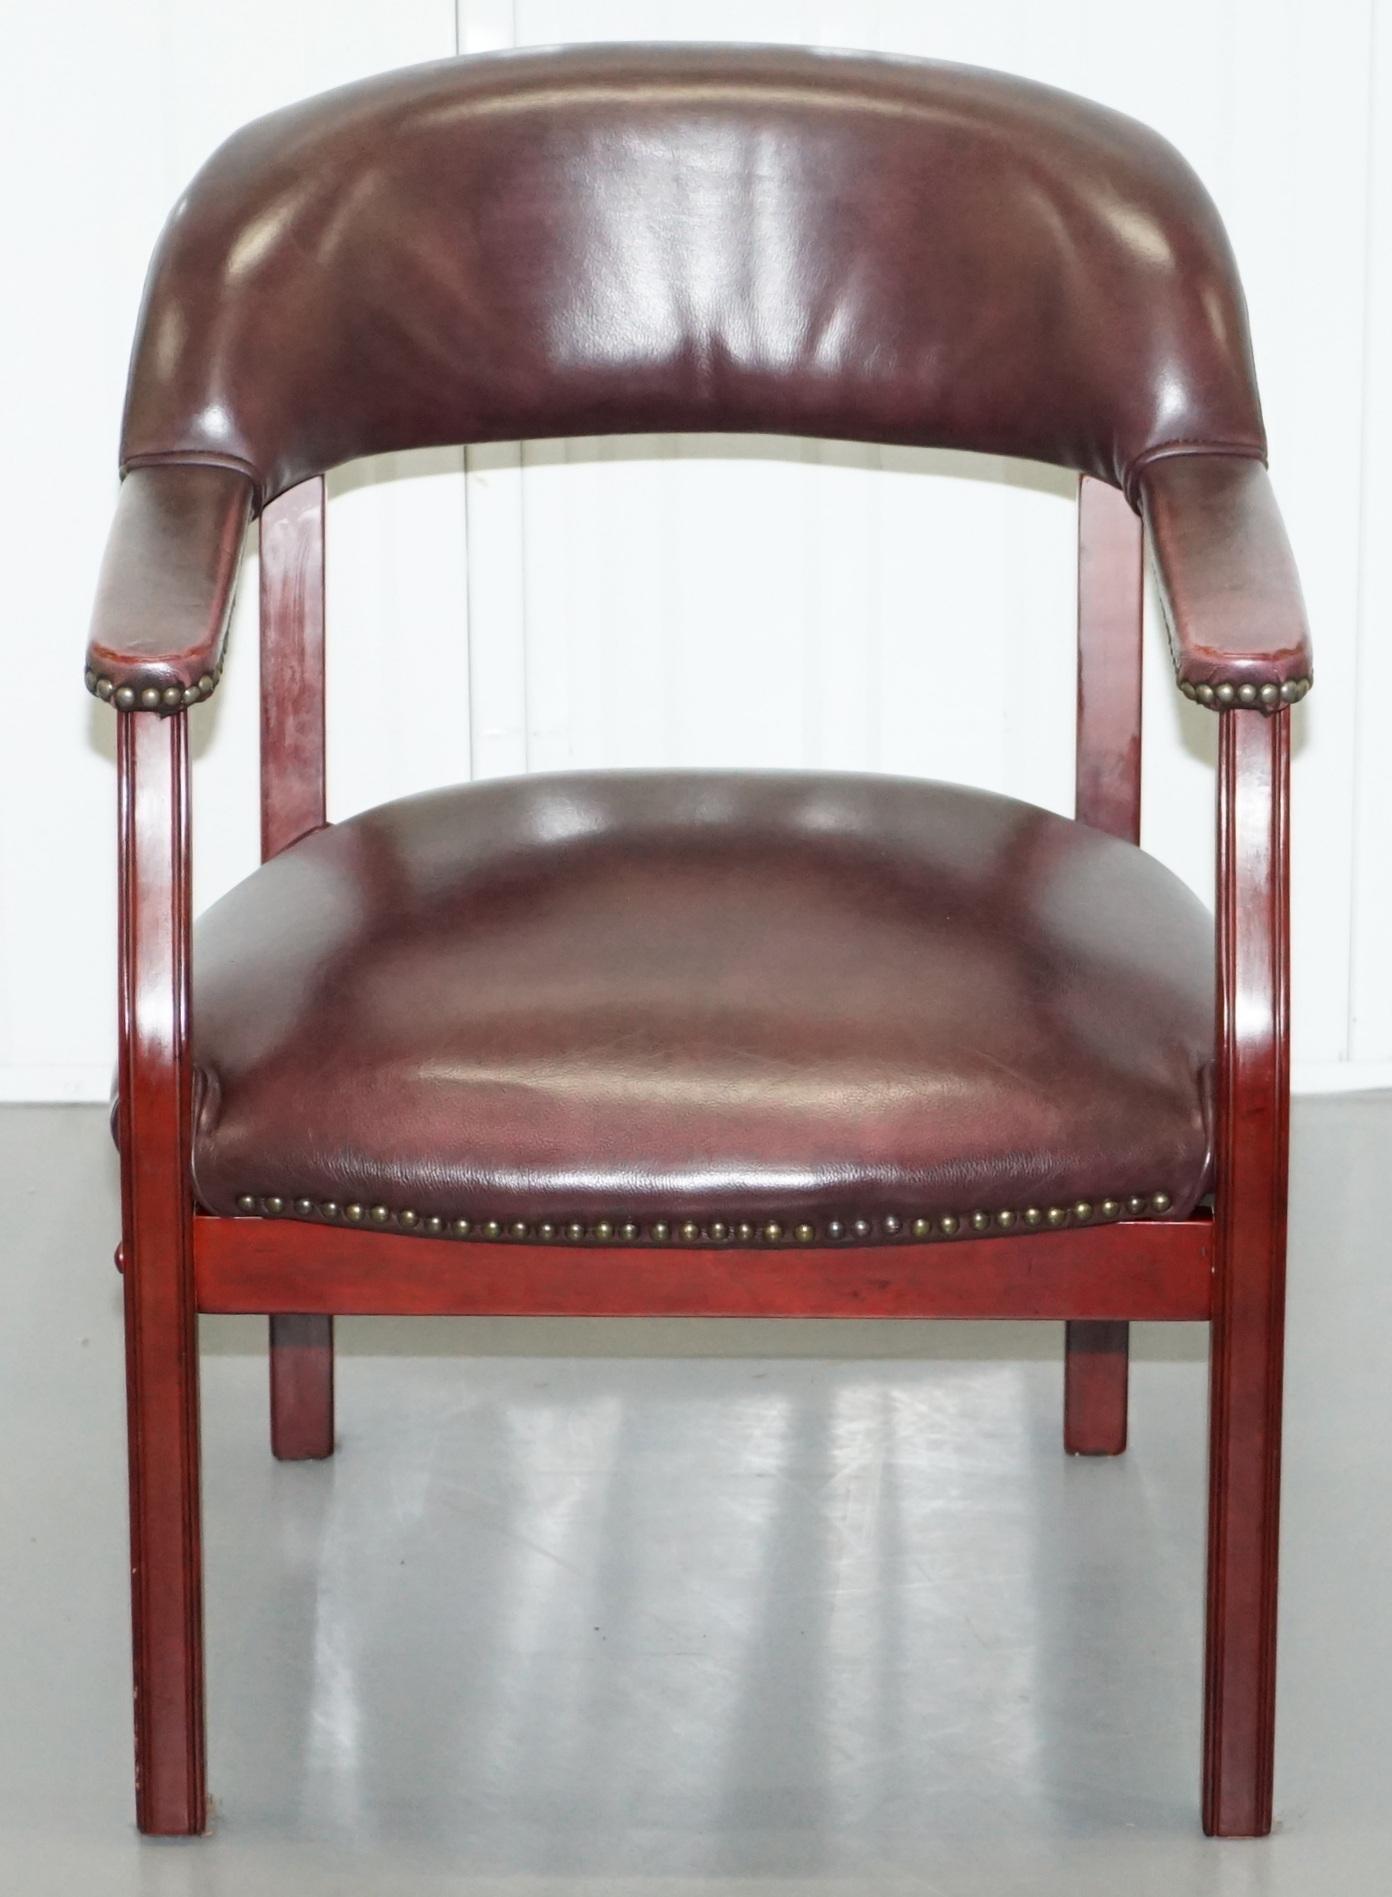 We are delighted to this lovely Art Deco style leather office tub armchair

A good looking well made and comfortable armchair, designed as an occasional or desk chair

We have cleaned waxed and polished it from top to bottom, there are normal